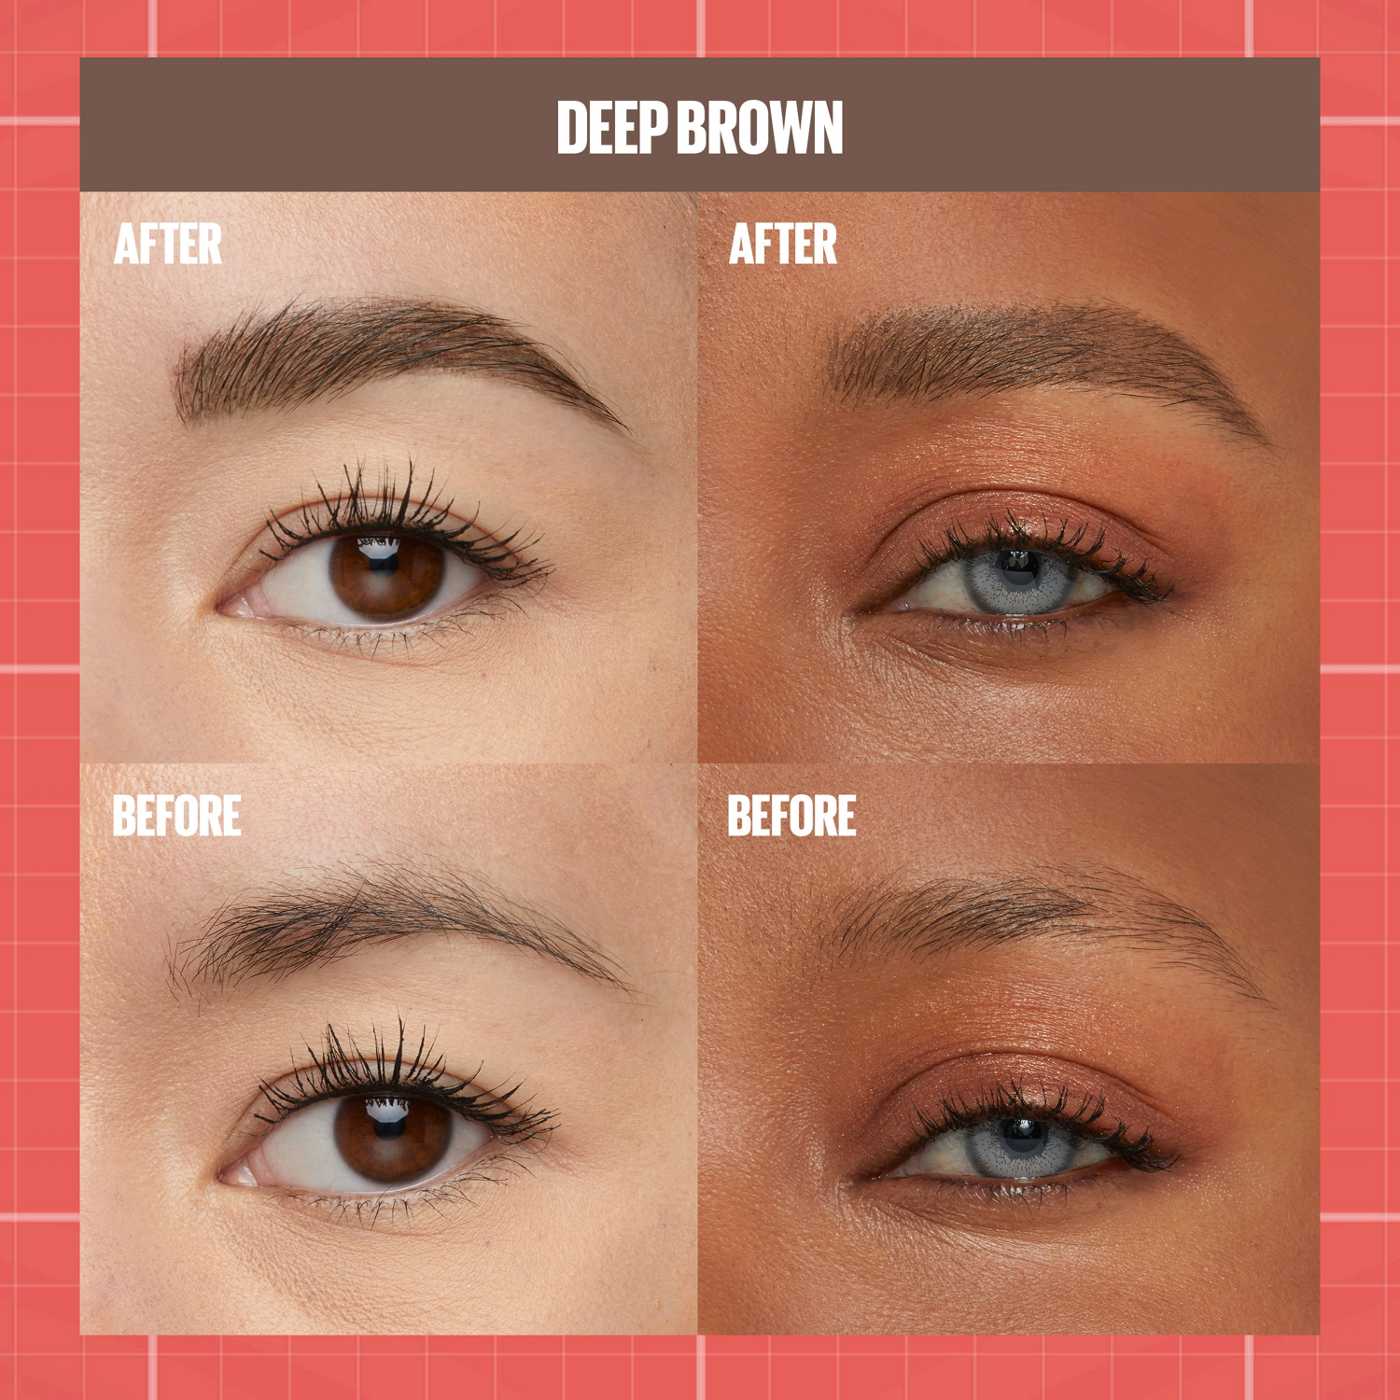 Maybelline Build A Brow 2 In 1 Brow Pen - Deep Brown; image 8 of 17